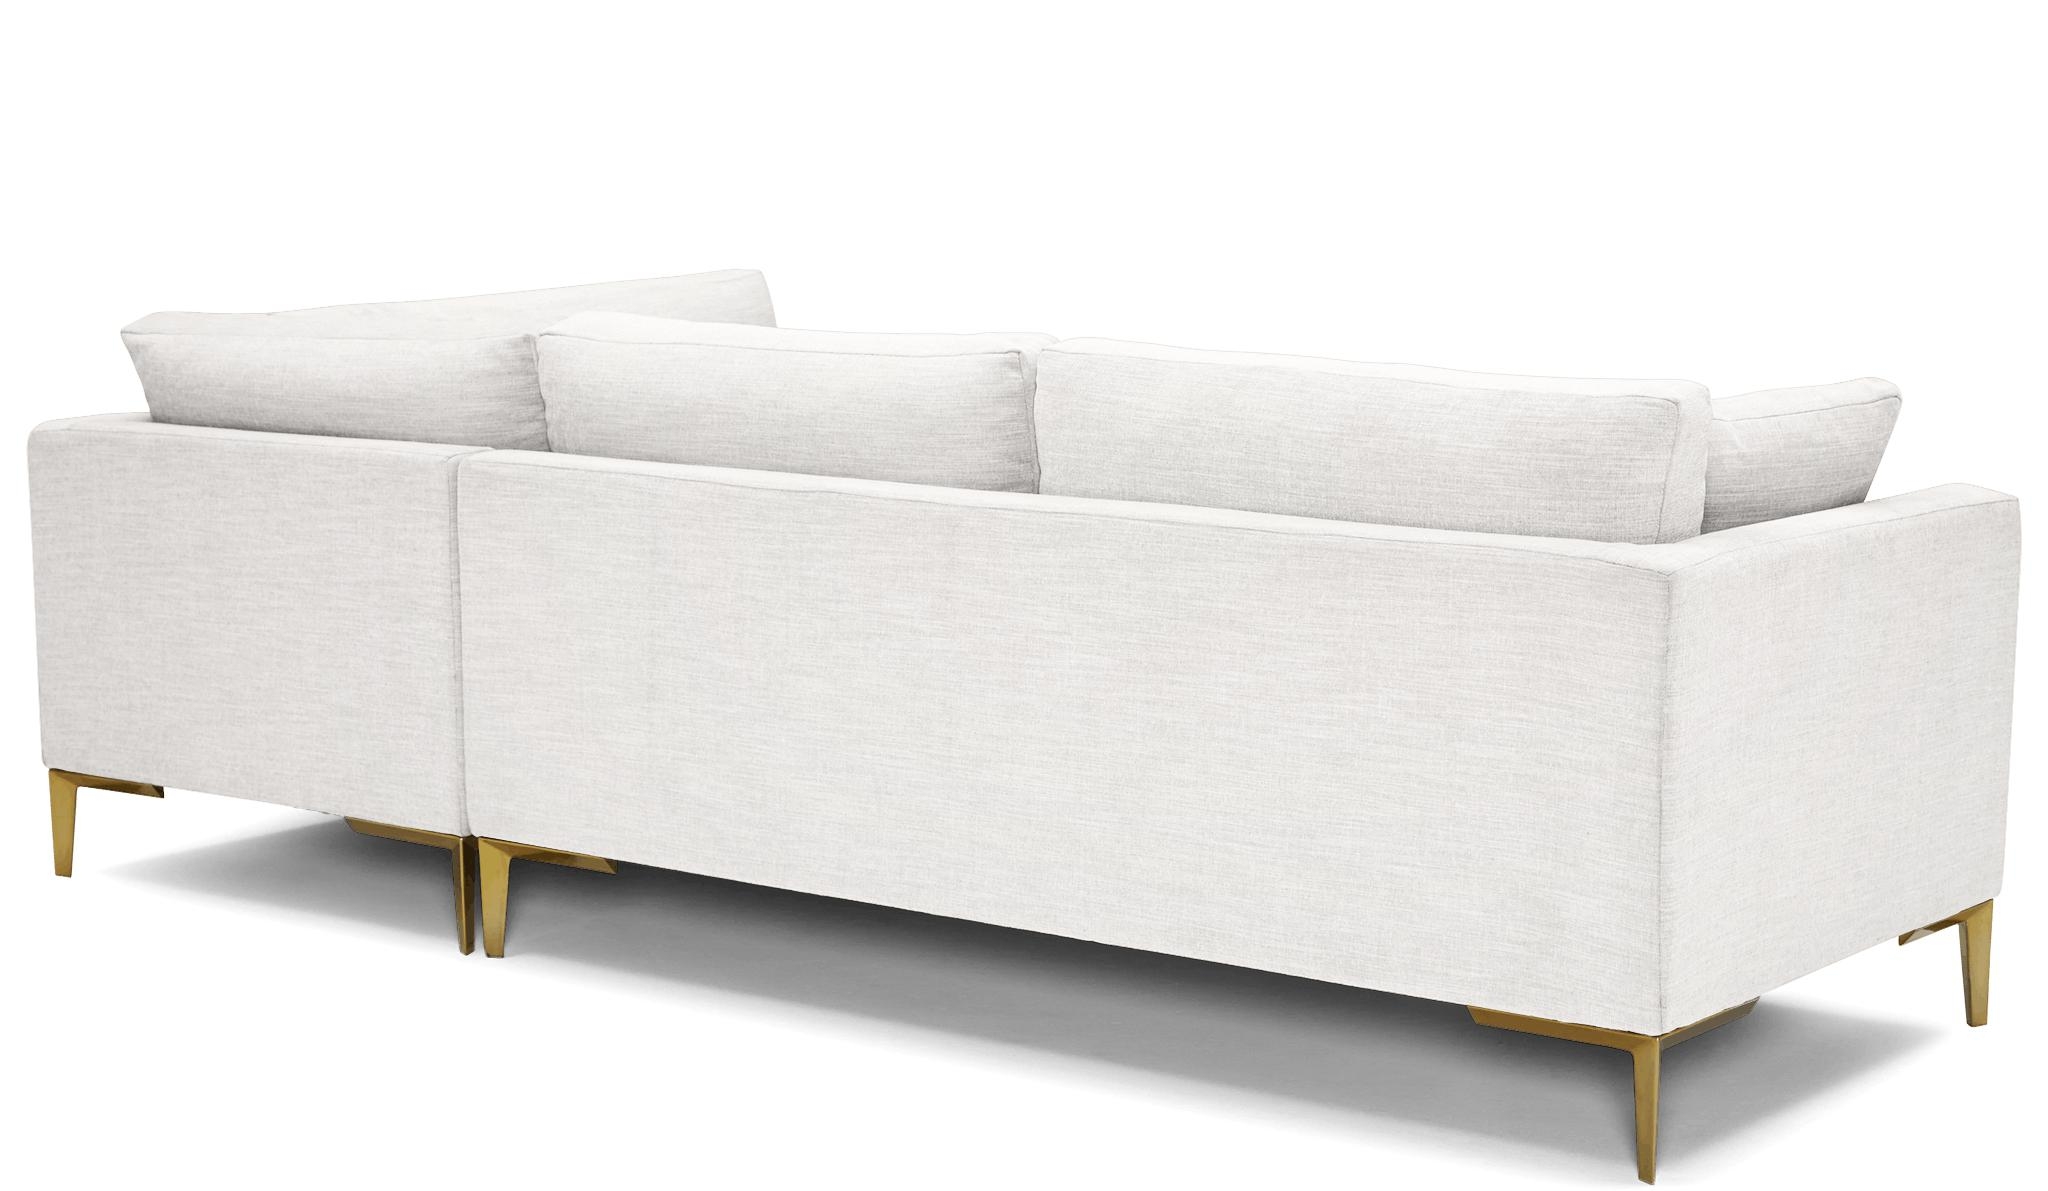 White Ainsley Mid Century Modern Sectional with Bumper - Tussah Blizzard - Right - Image 3